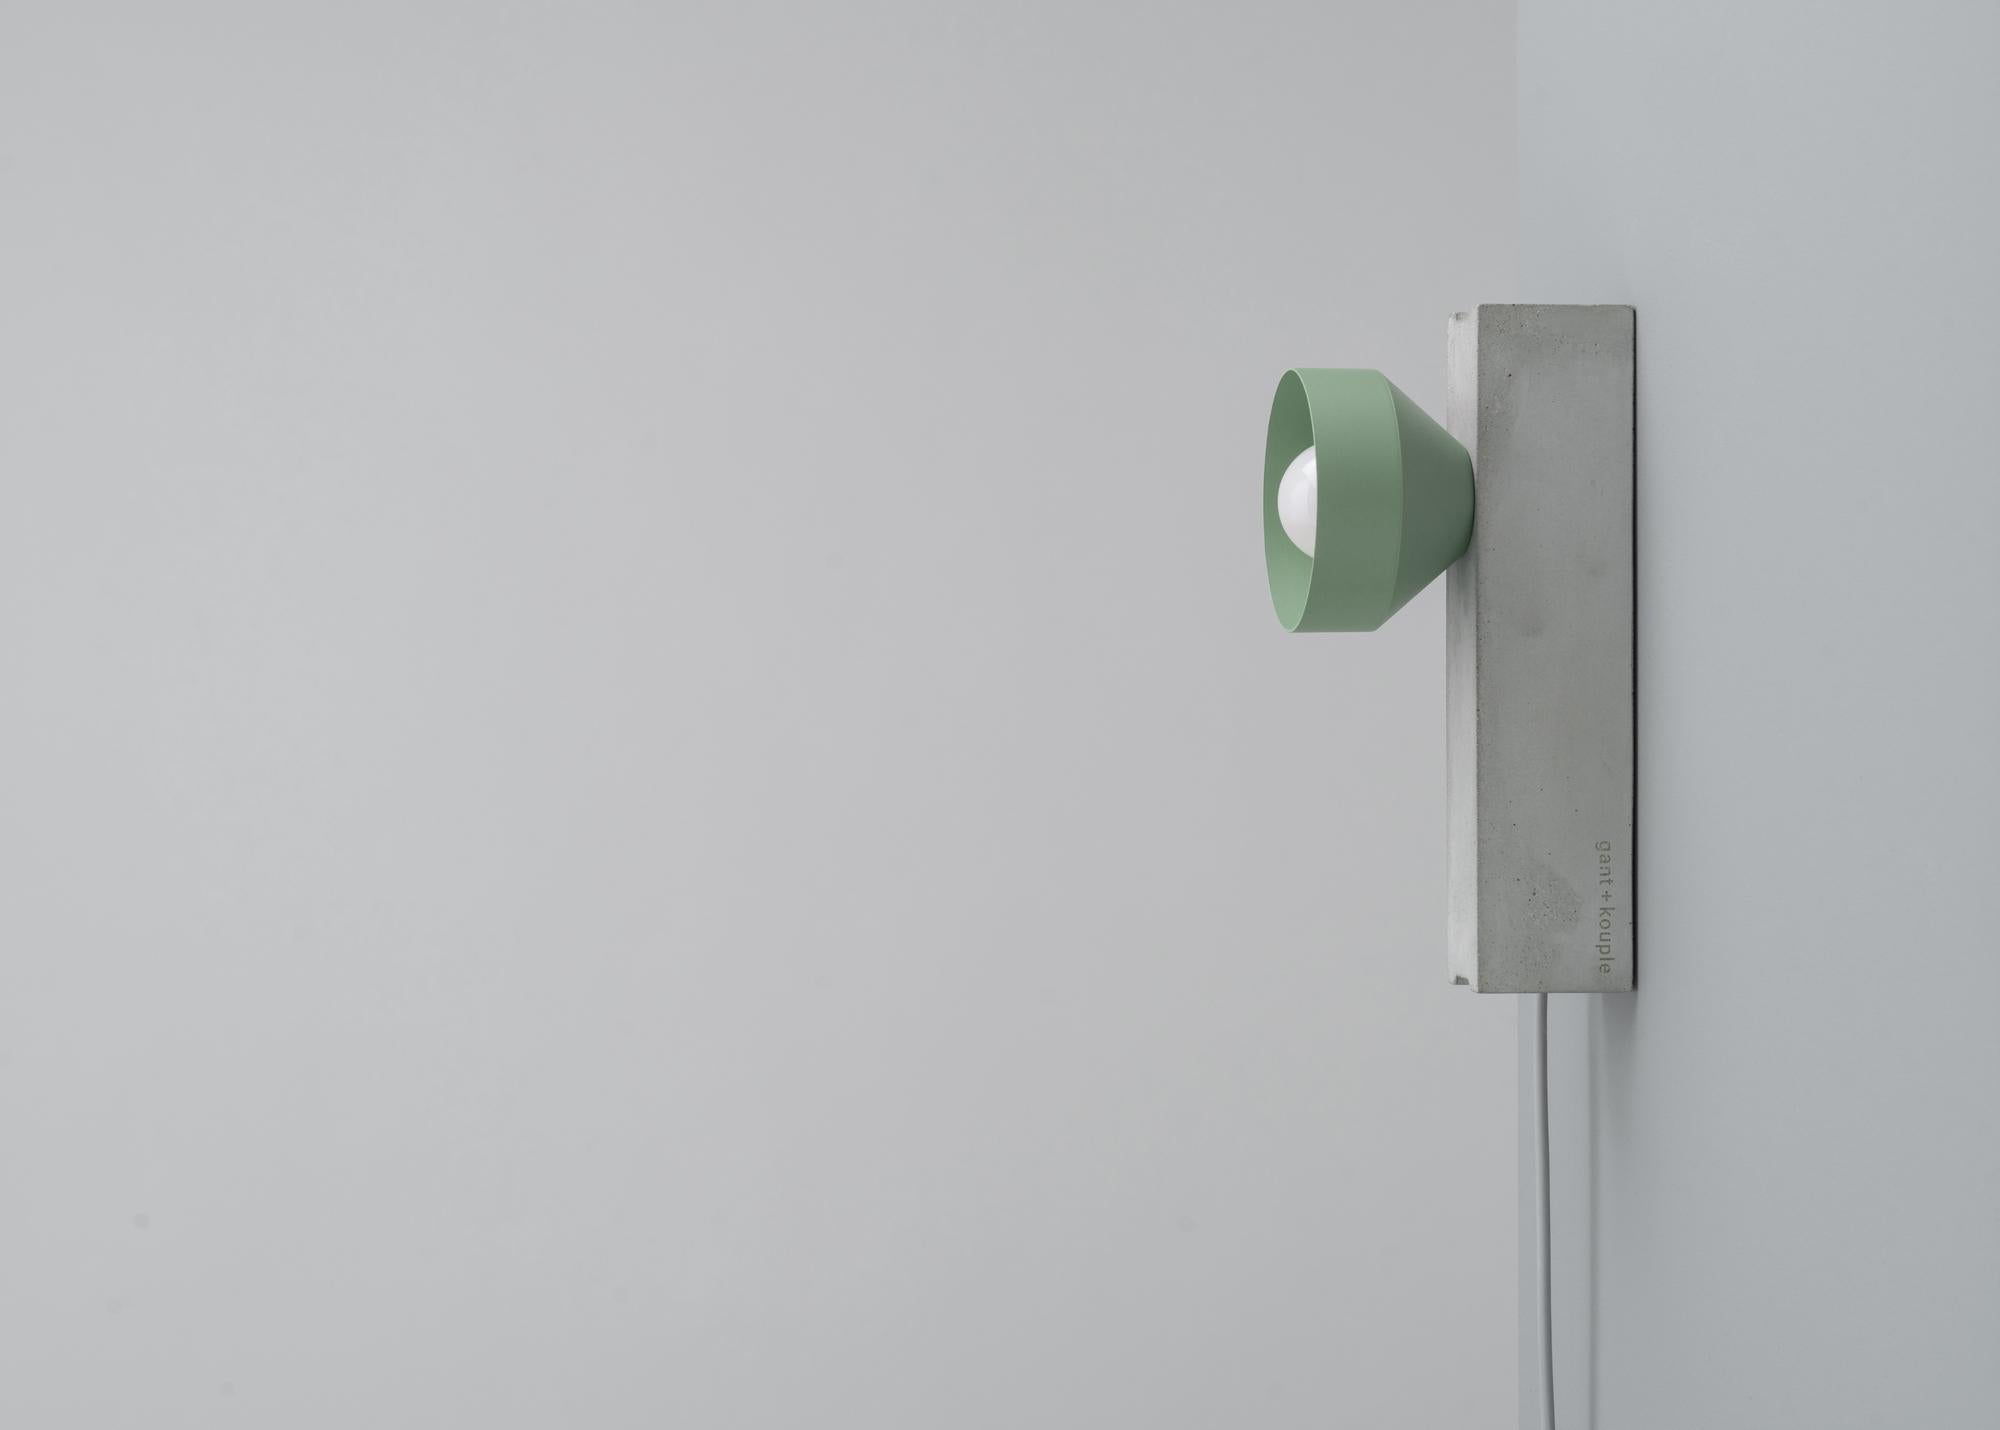 Moss Block Wall Lamp by +kouple
Dimensions: D 26 x W 10 x H 12,7 cm.
Materials: Concrete, powder-coated steel and textile. 

Available in different color options. Please contact us.

All our lamps can be wired according to each country. If sold to